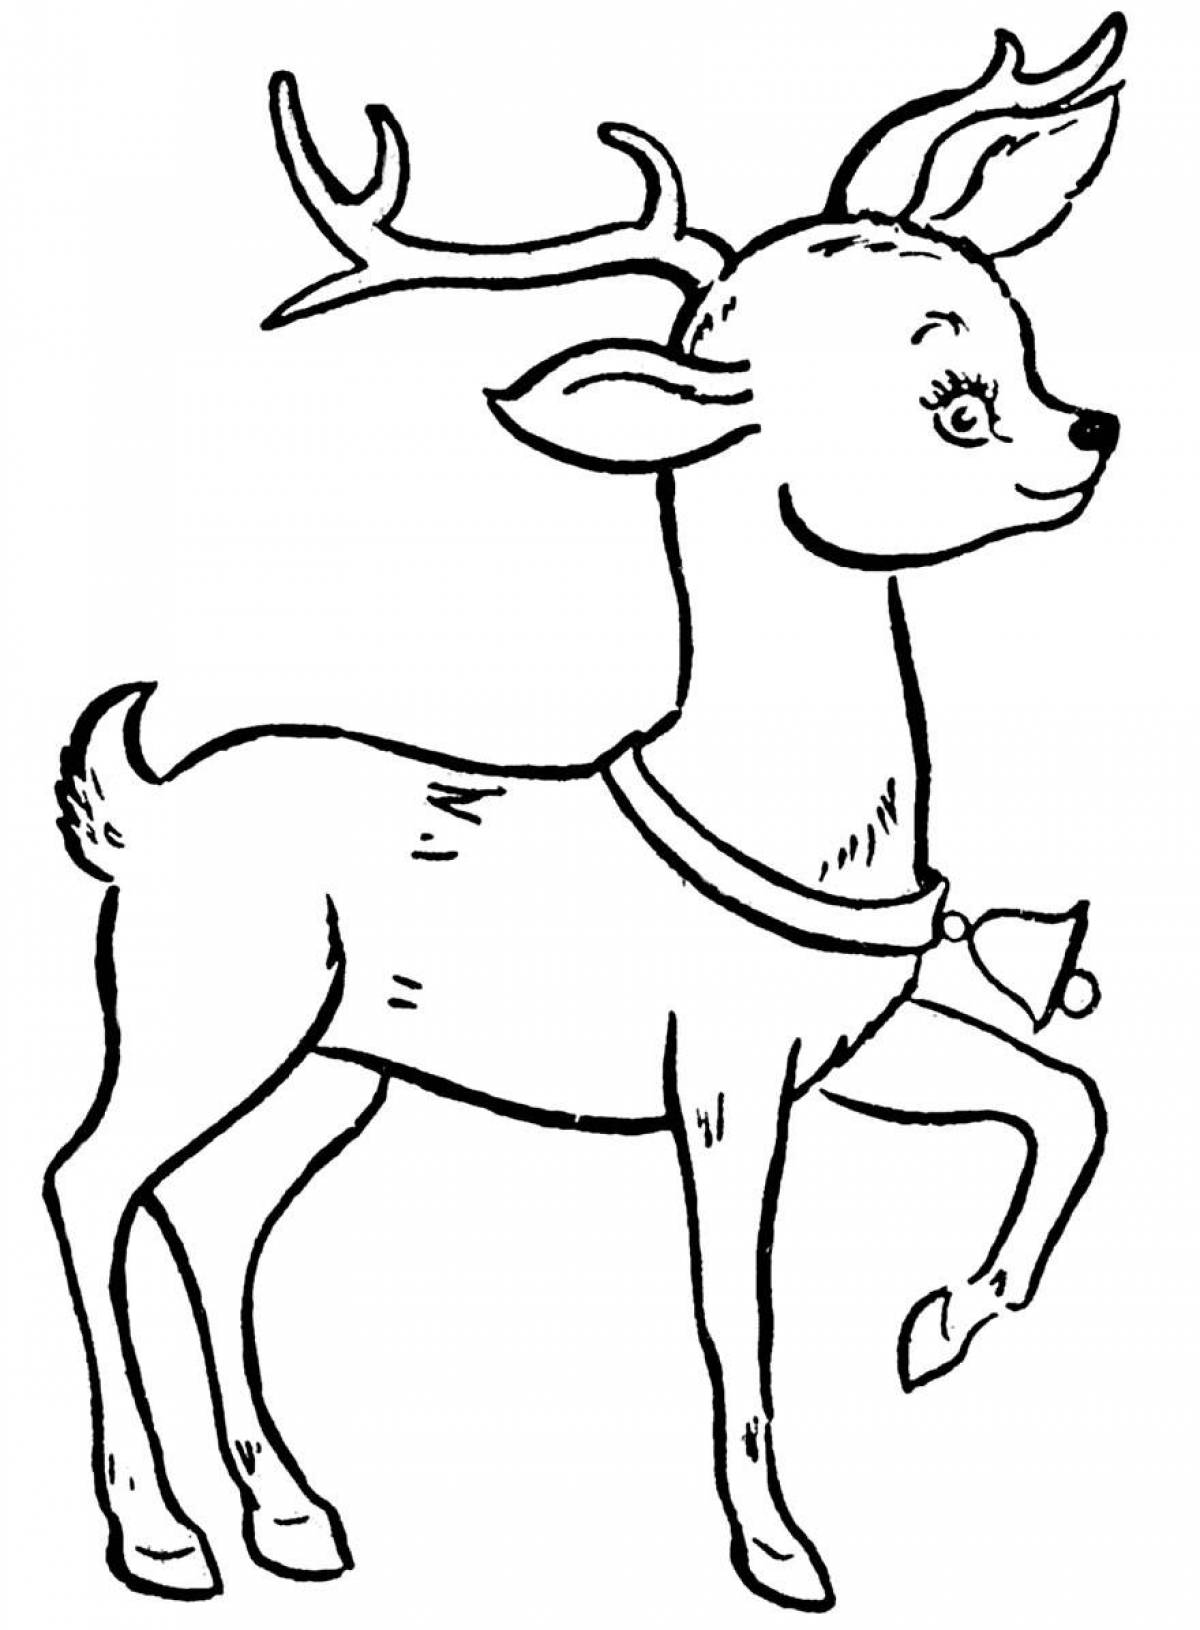 Coloring page dazzling christmas deer